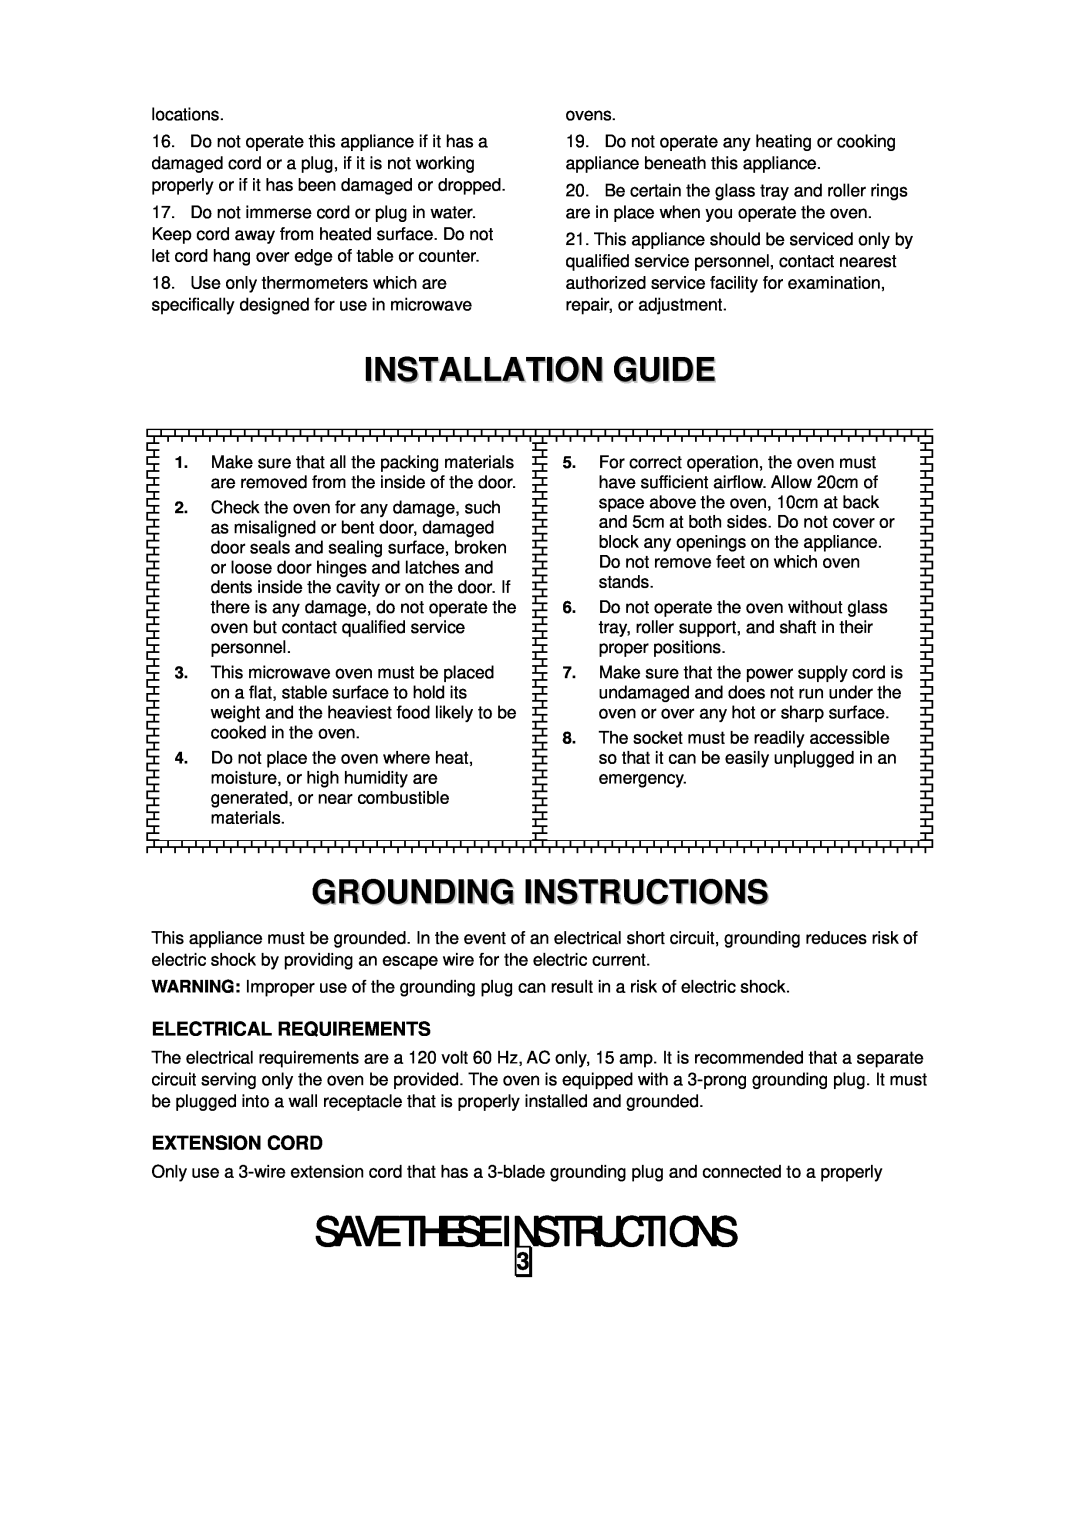 Sanyo EM-S7595S instruction manual Installation Guide, Grounding Instructions, Electrical Requirements, Extension Cord 